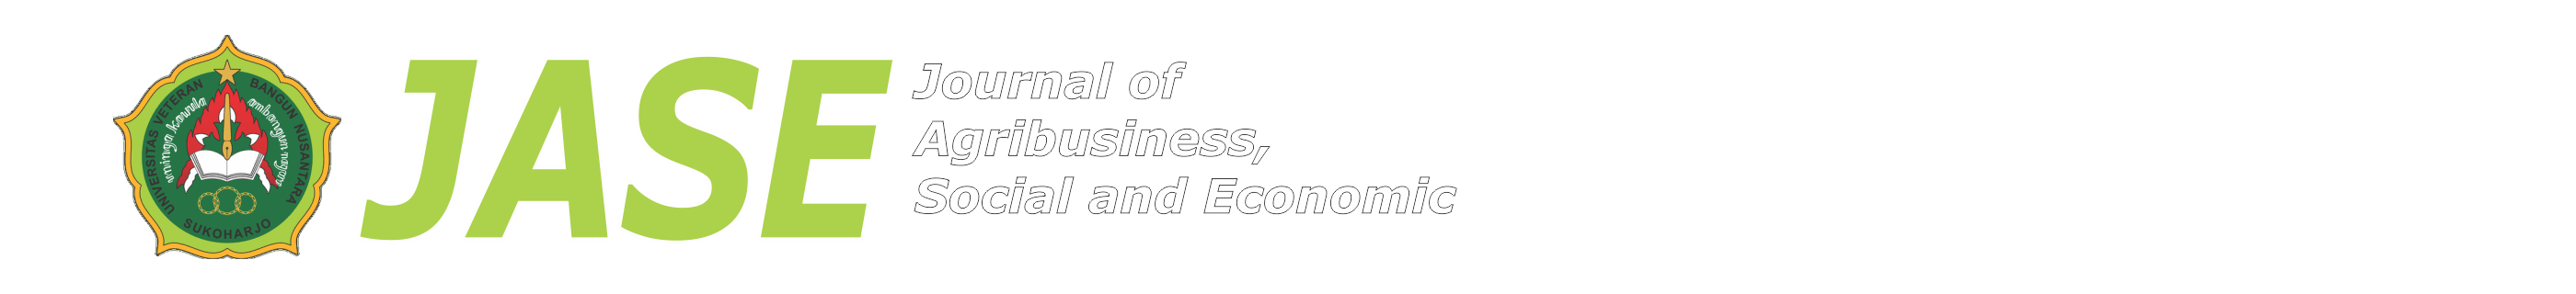 Journal of Agribusiness, Social and Economic (JASE)